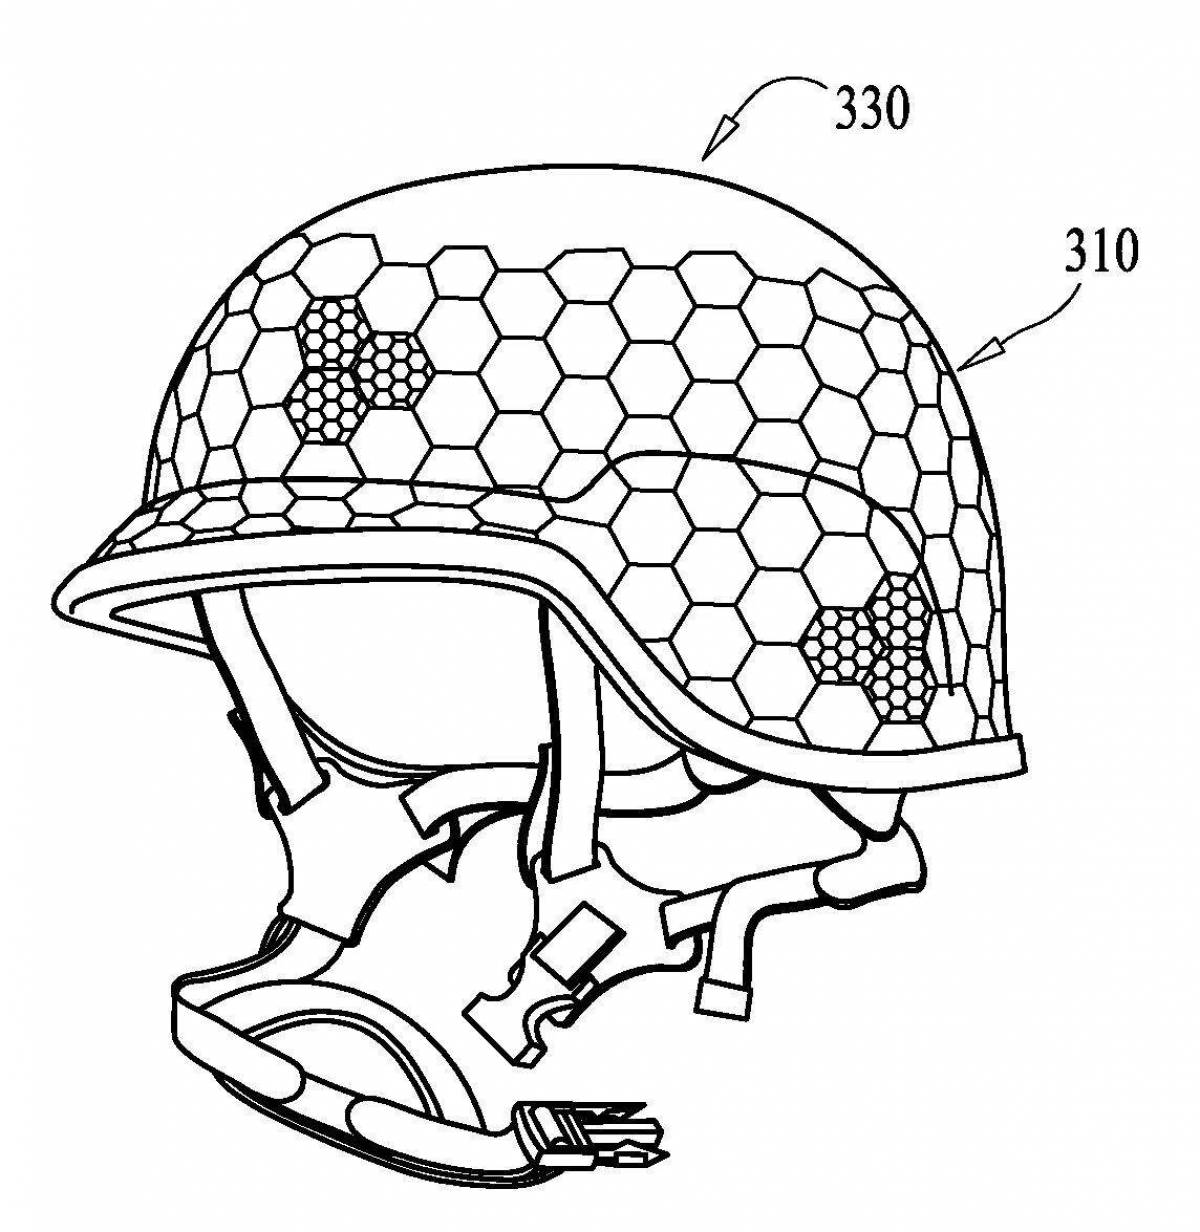 Playful military helmet coloring book for kids